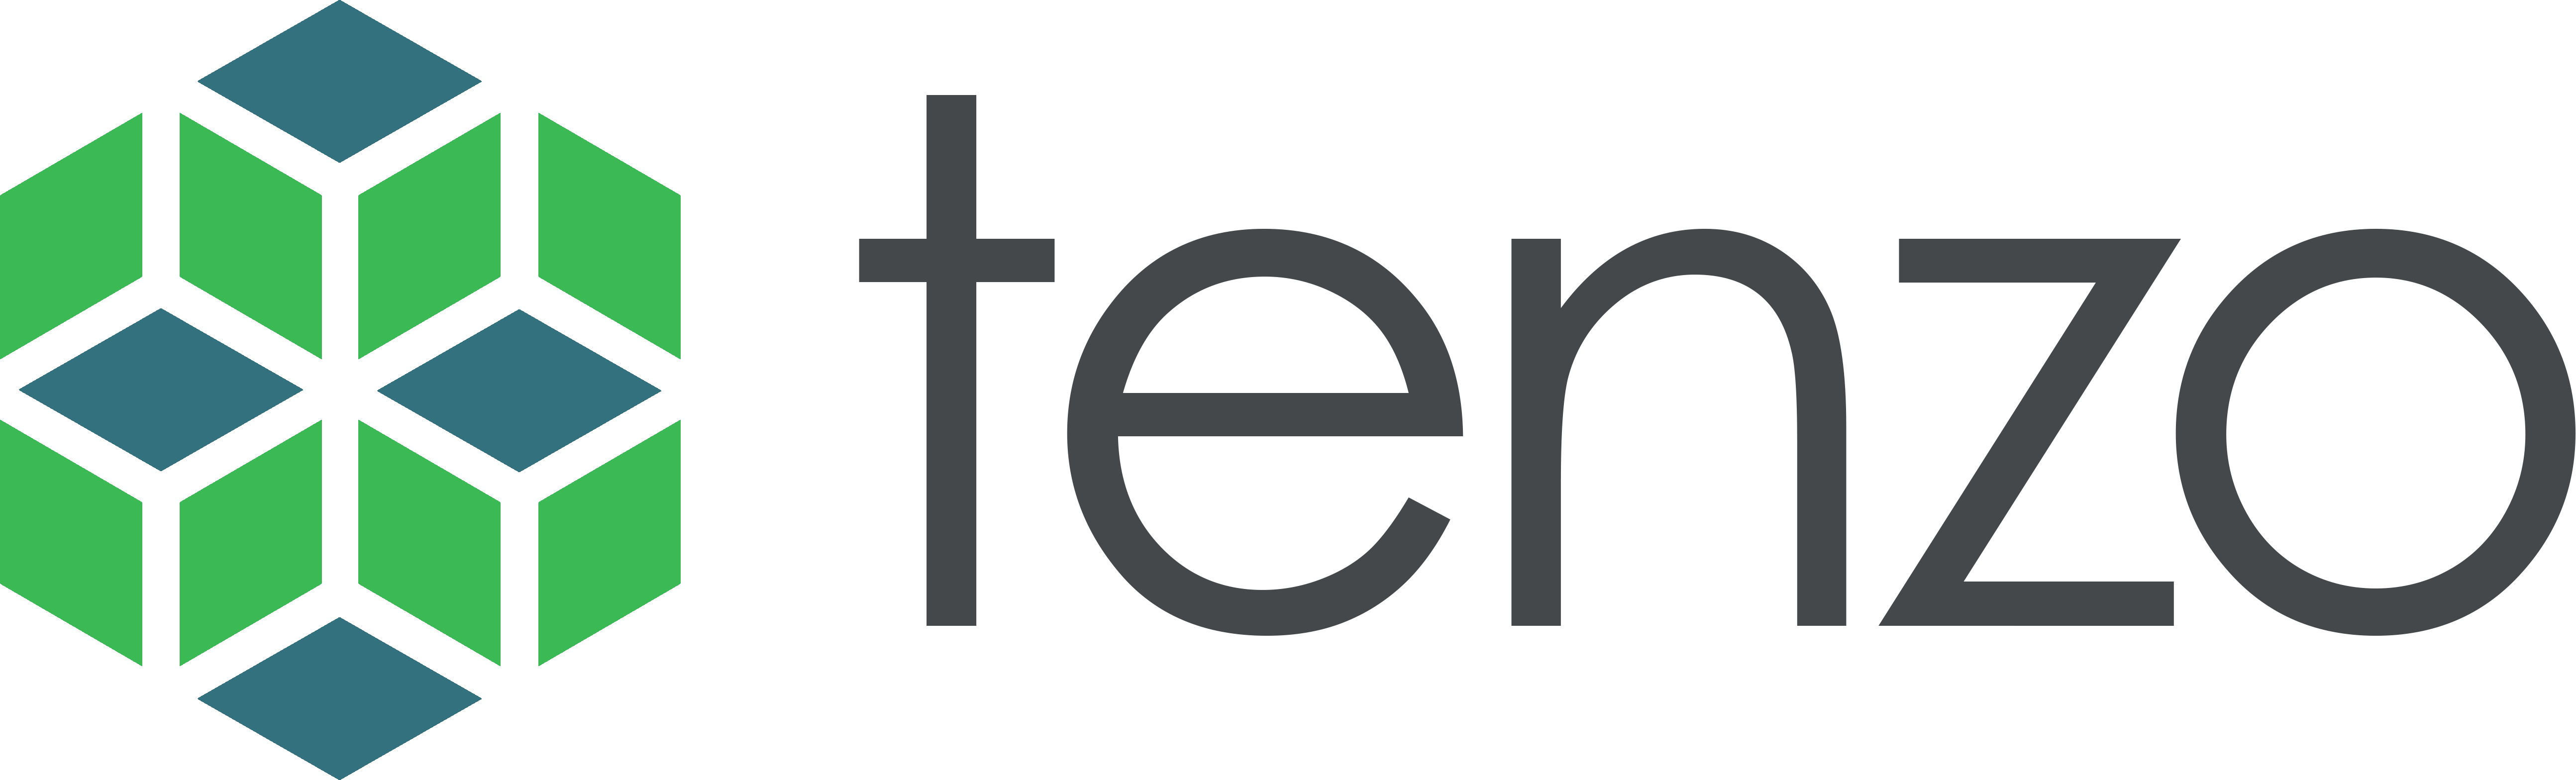 Tenzo_Logo_Color.png